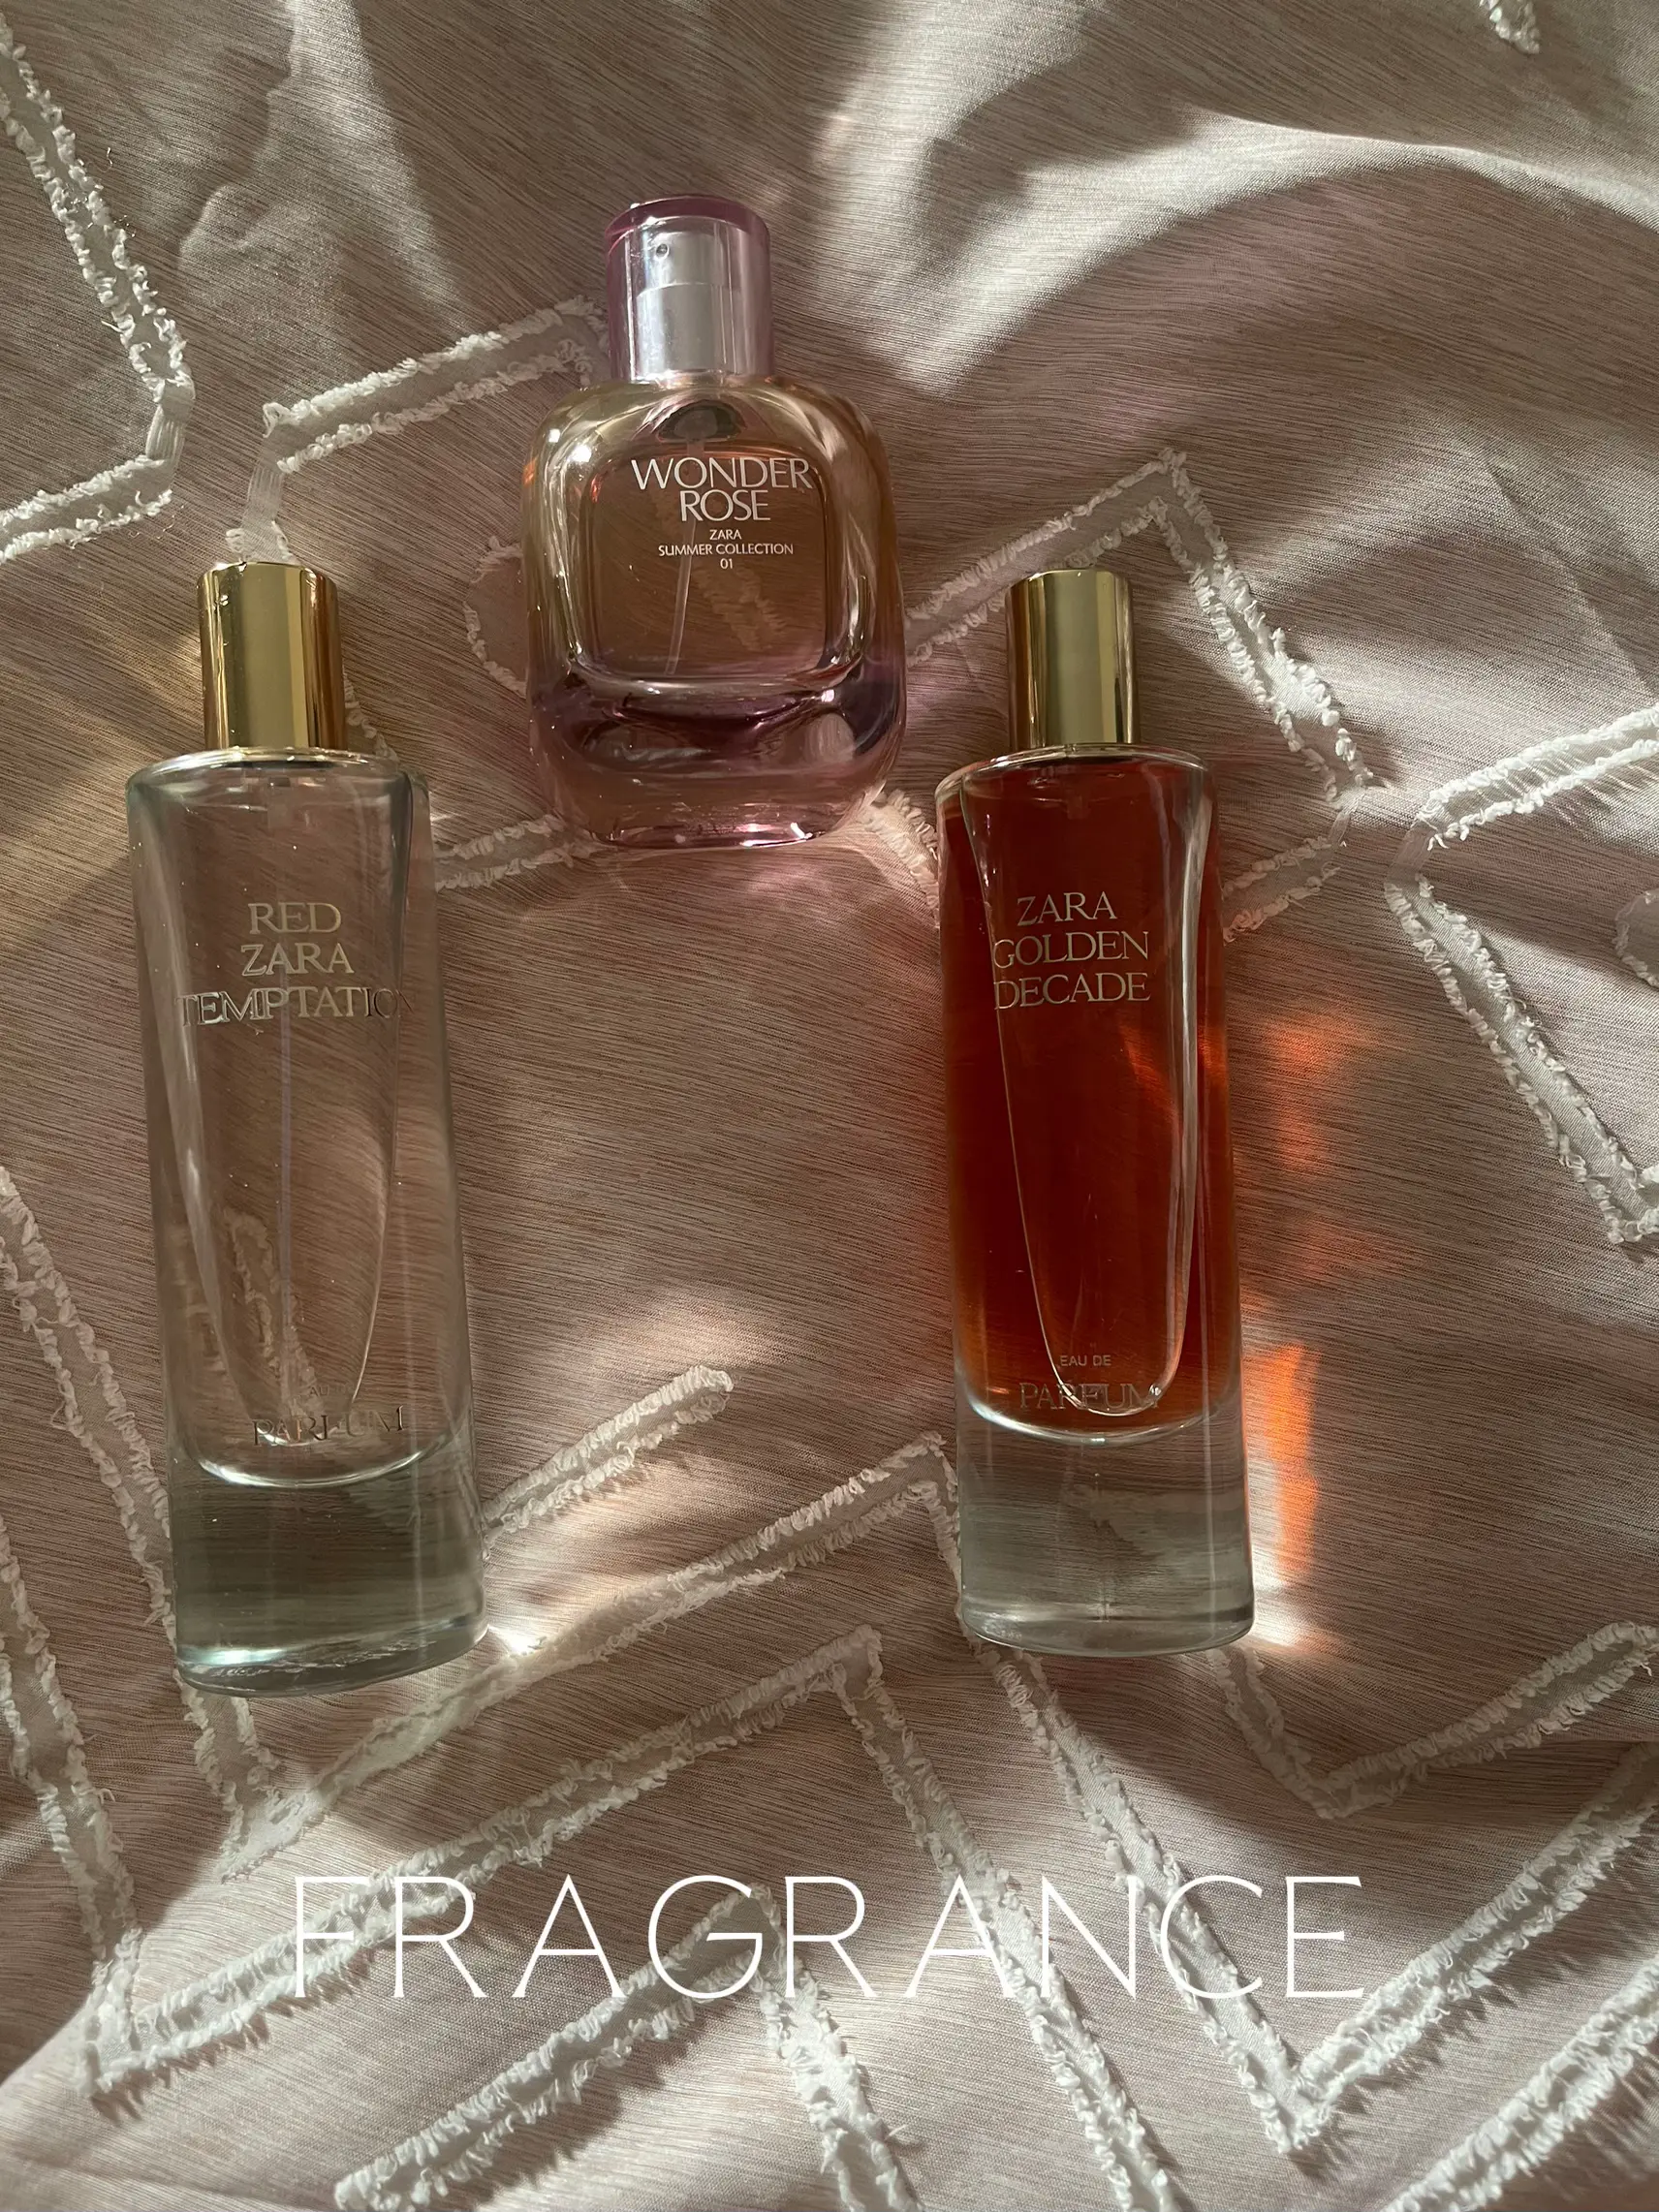 Among the amazing #Zara Perfume dupes I have tried, Golden Decade is r